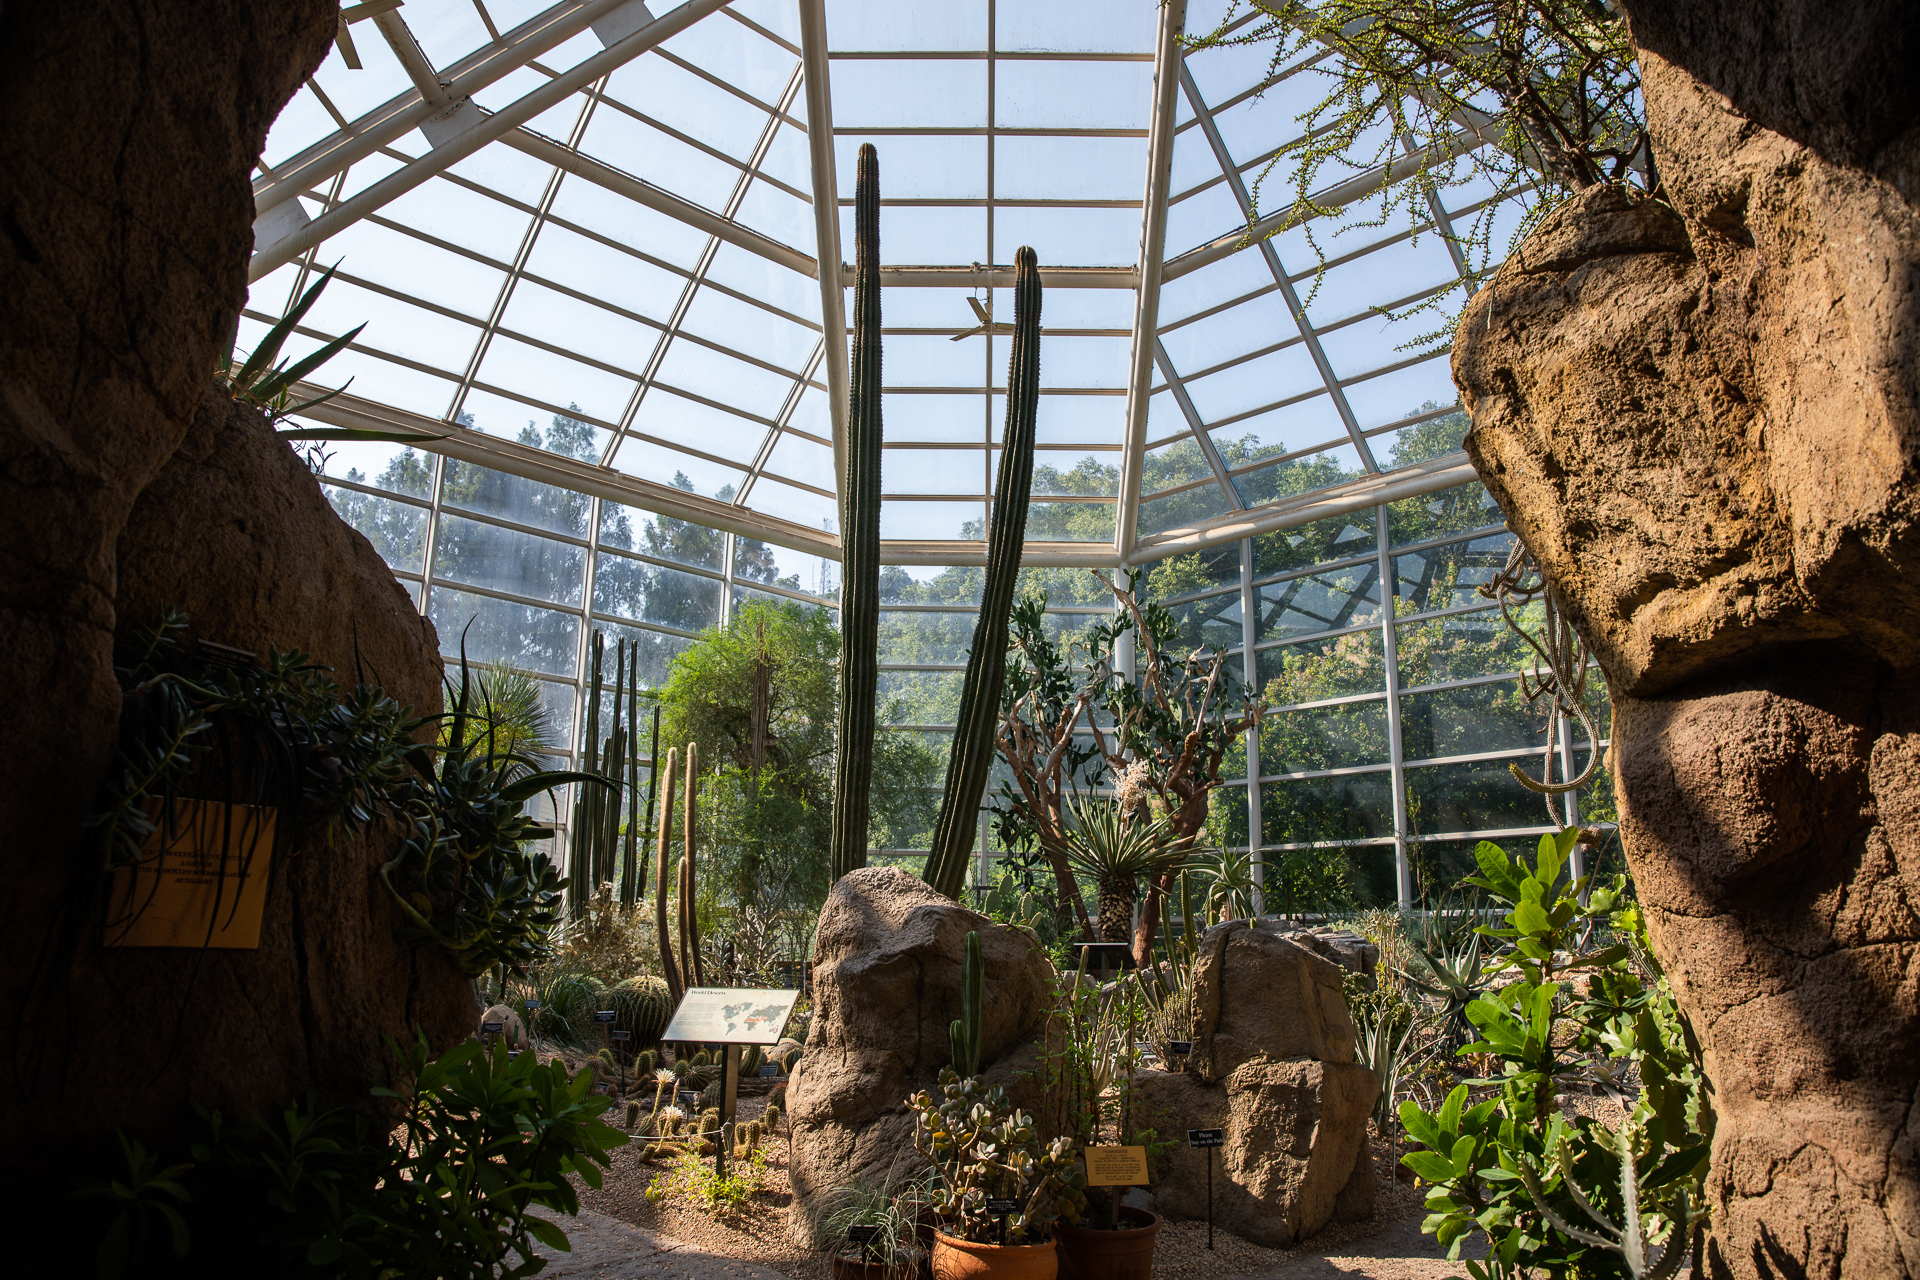 Greenhouse plants will be put at risk if towers are constructed 150 feet away from Brooklyn Botanic Garden. Photo: Paul Frangipane/Brooklyn Eagle